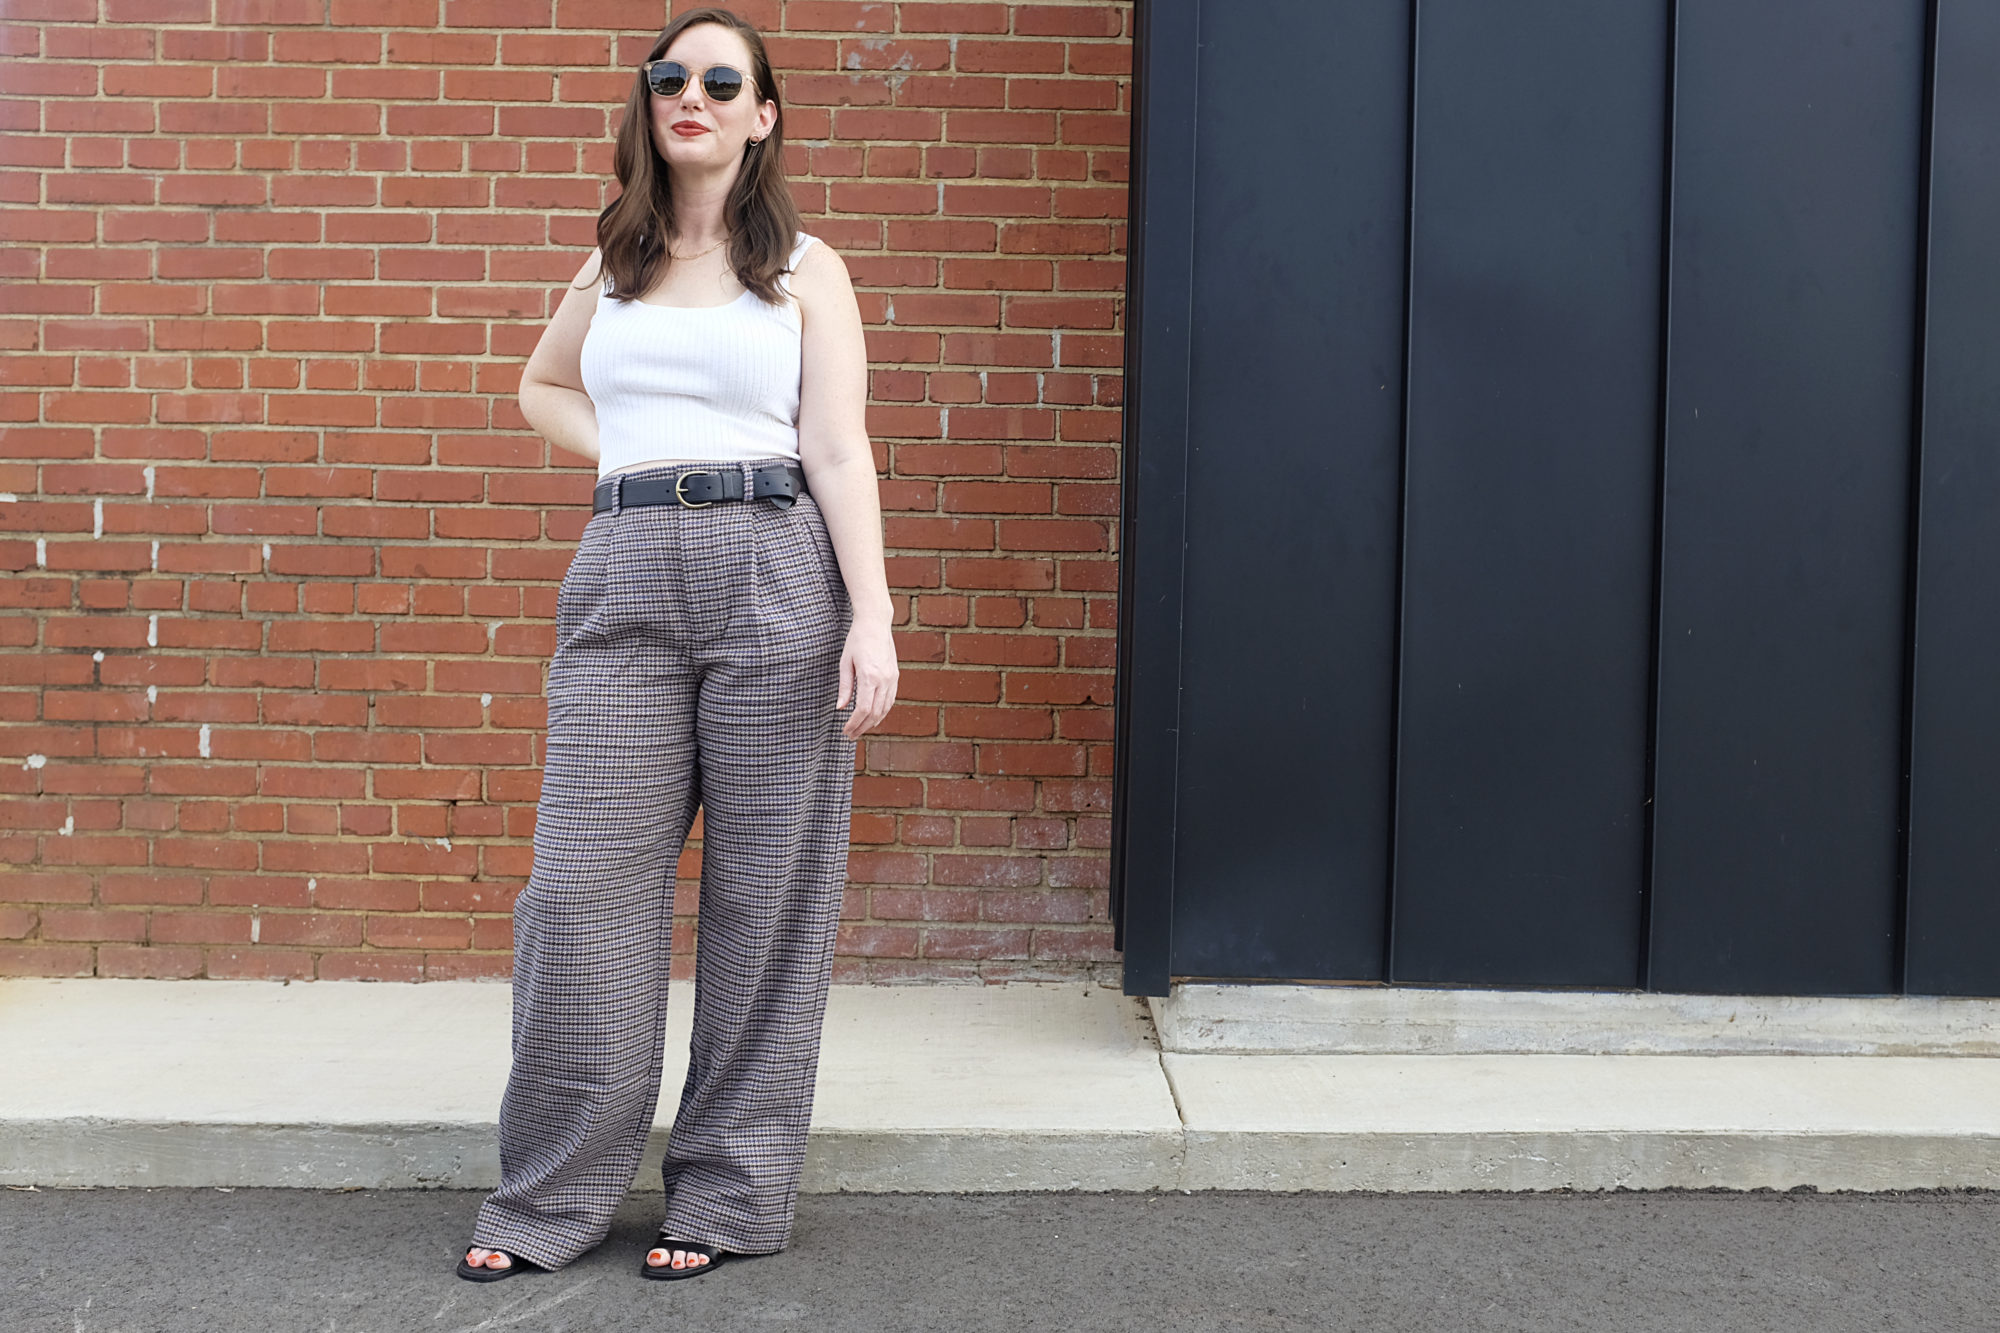 Alyssa wears The ReWool Way-High Drape Pant in front of a brick wall